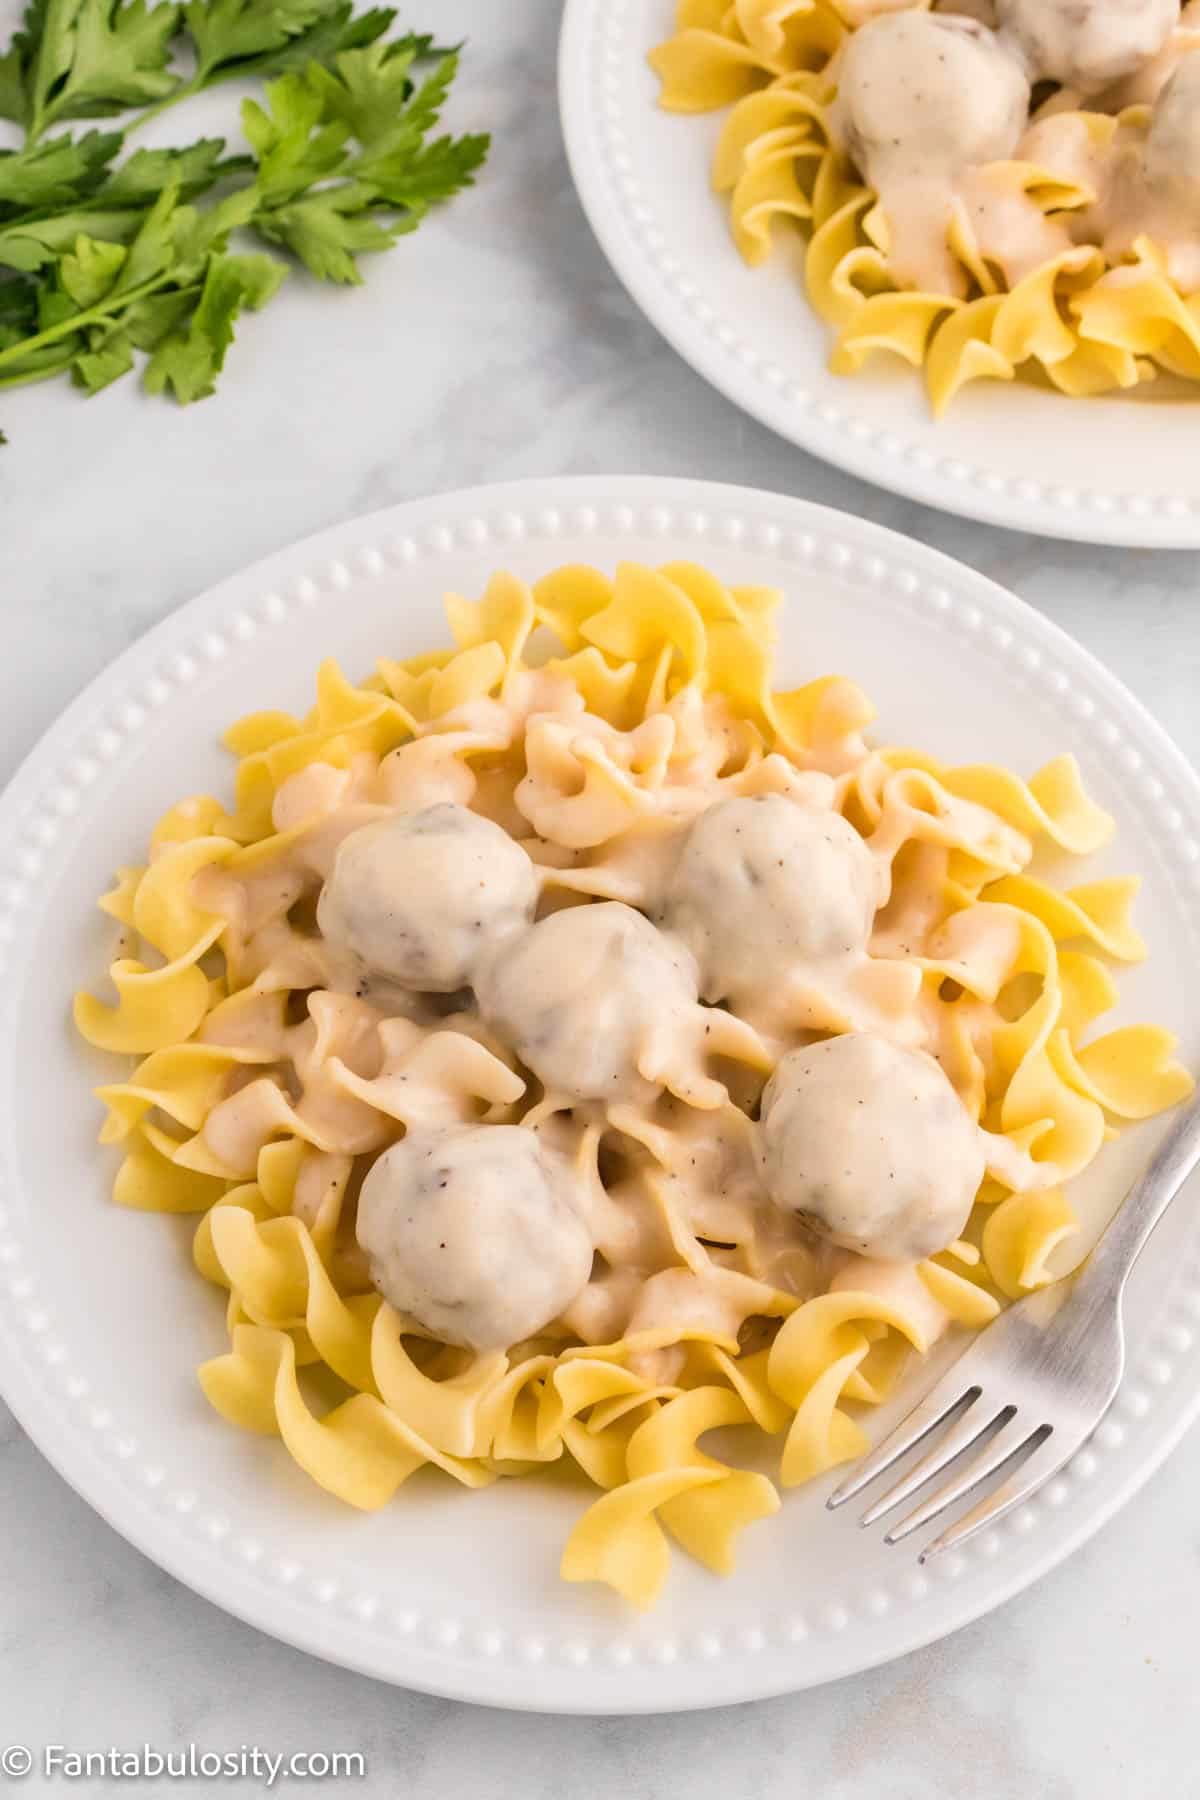 Swedish meatballs and sauce top cooked egg noodles on a white plate